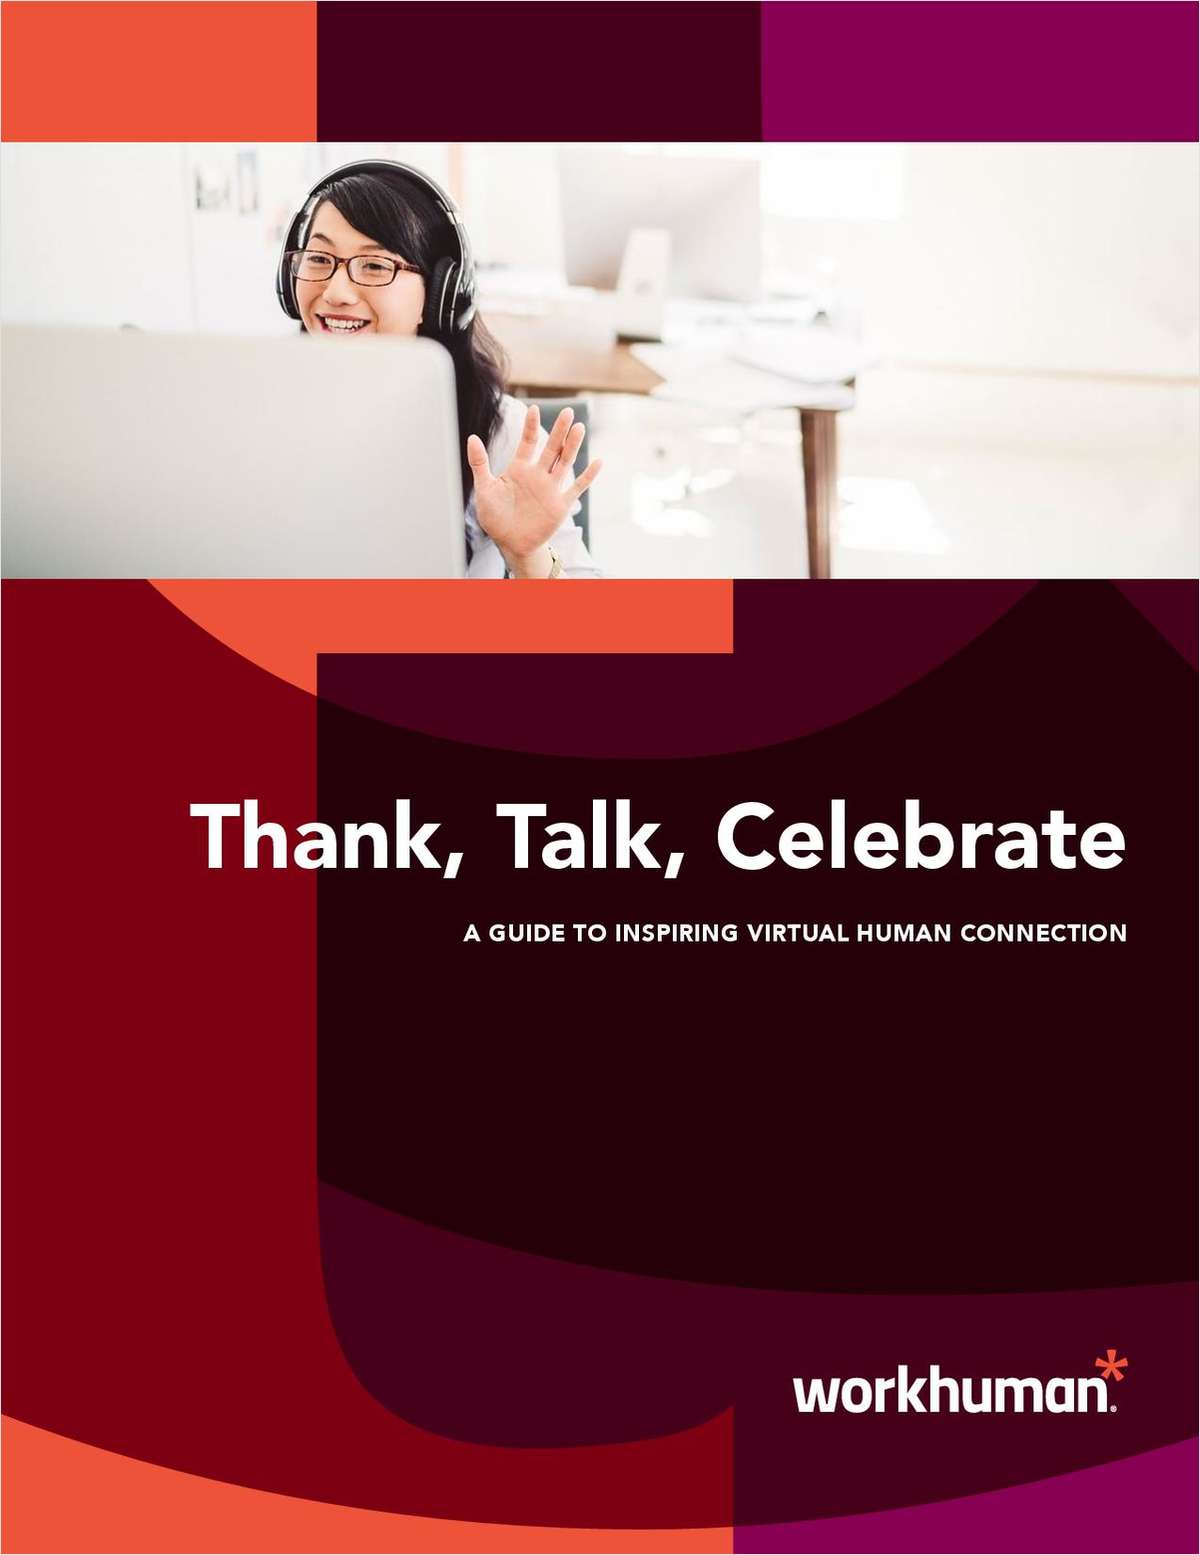 Thank, Talk, Celebrate: A Guide to Inspiring Virtual Human Connection